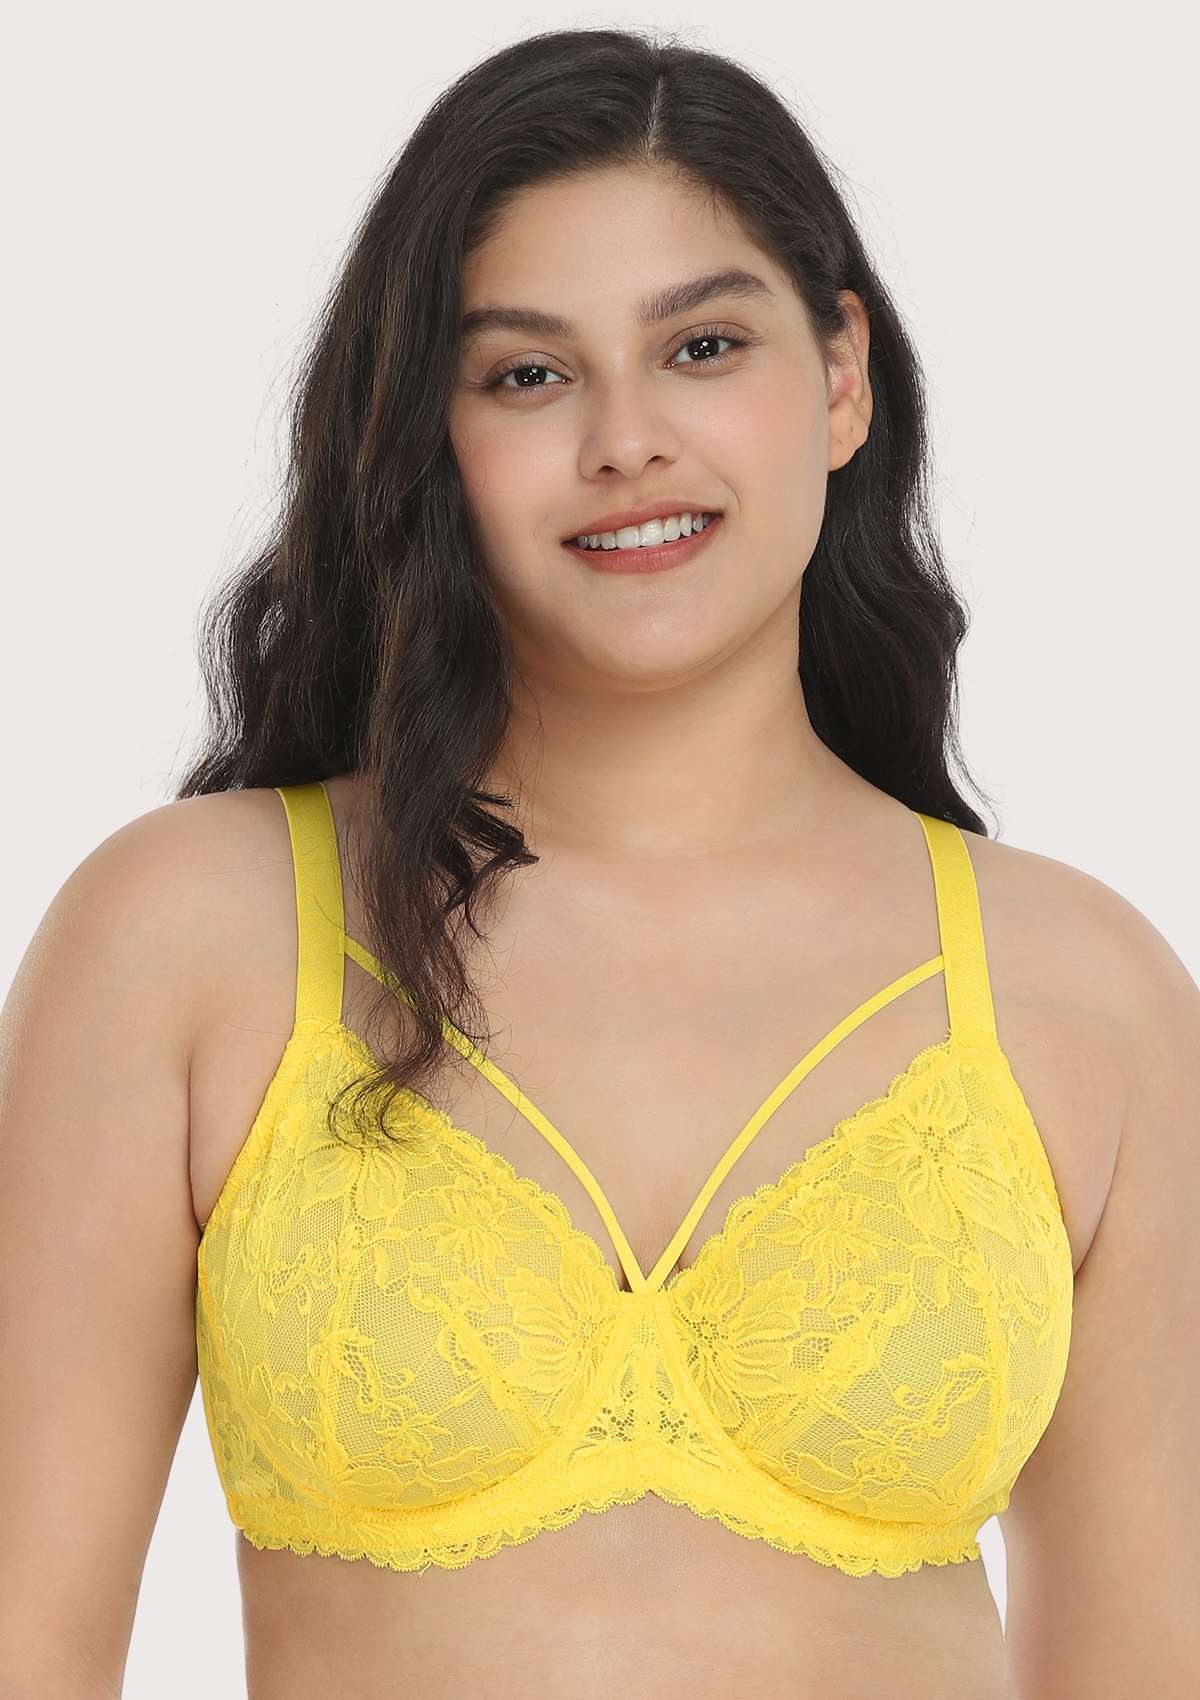 HSIA Unlined Lace Mesh Minimizer Bra For Large Breasts, Full Coverage - Bright Green / 36 / DDD/F